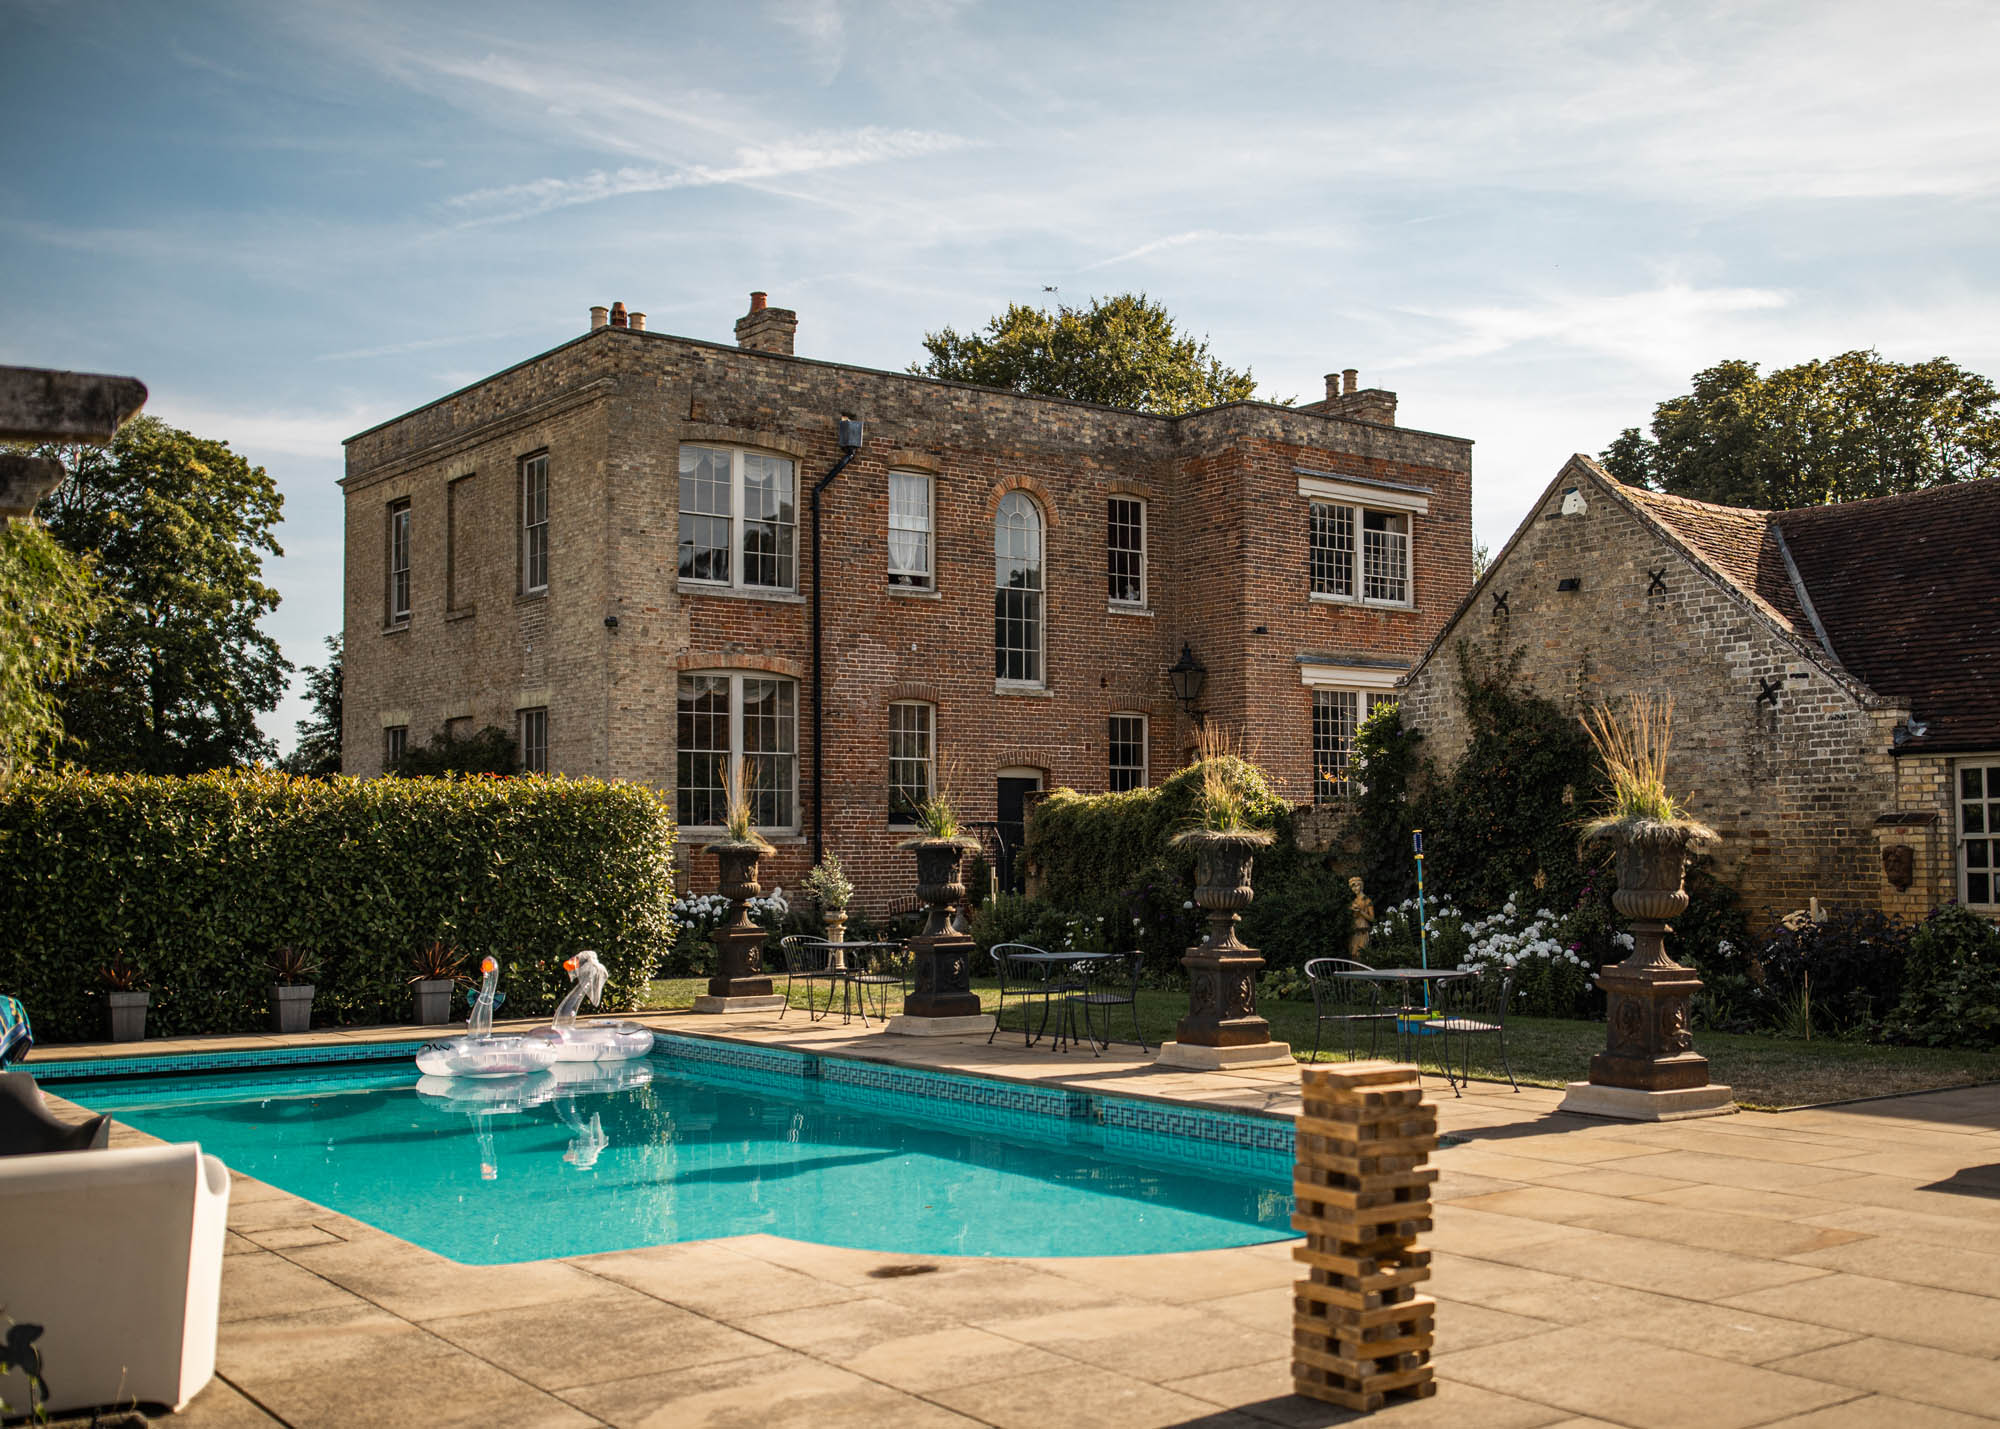 Bedfordshire manor house wedding venue Shortmead swimming pool view